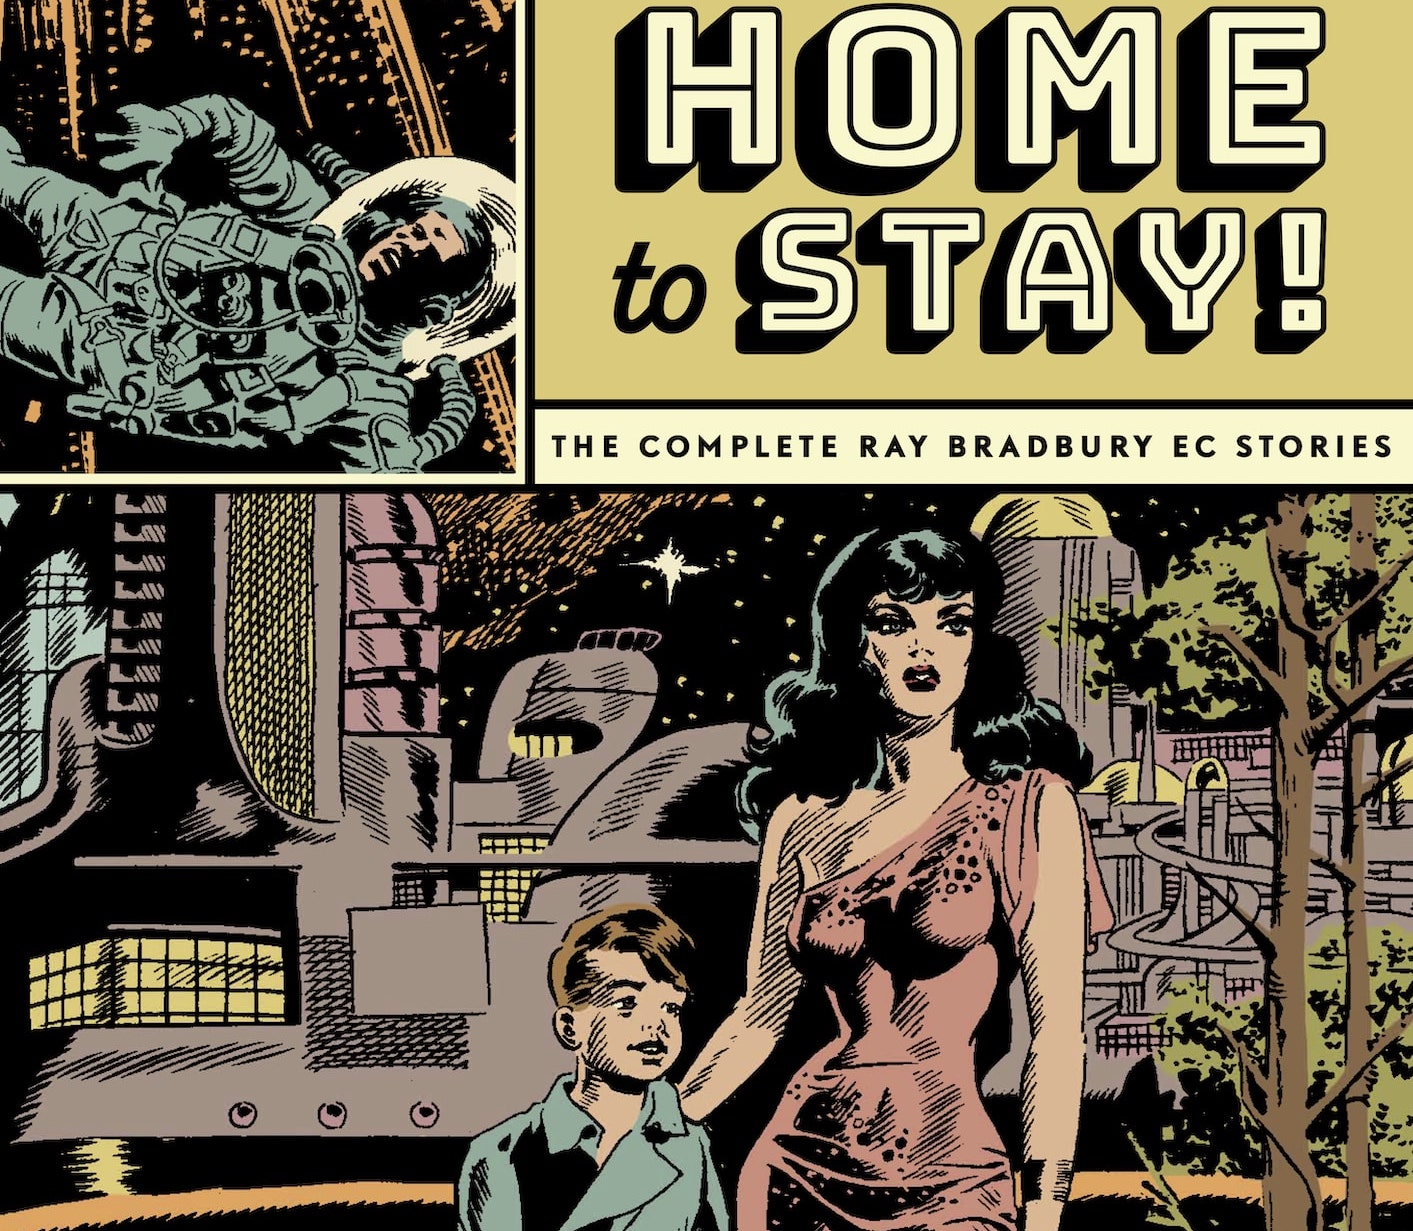 EXCLUSIVE Fantagraphics Preview: Home to Stay!: The Complete Ray Bradbury EC Stories